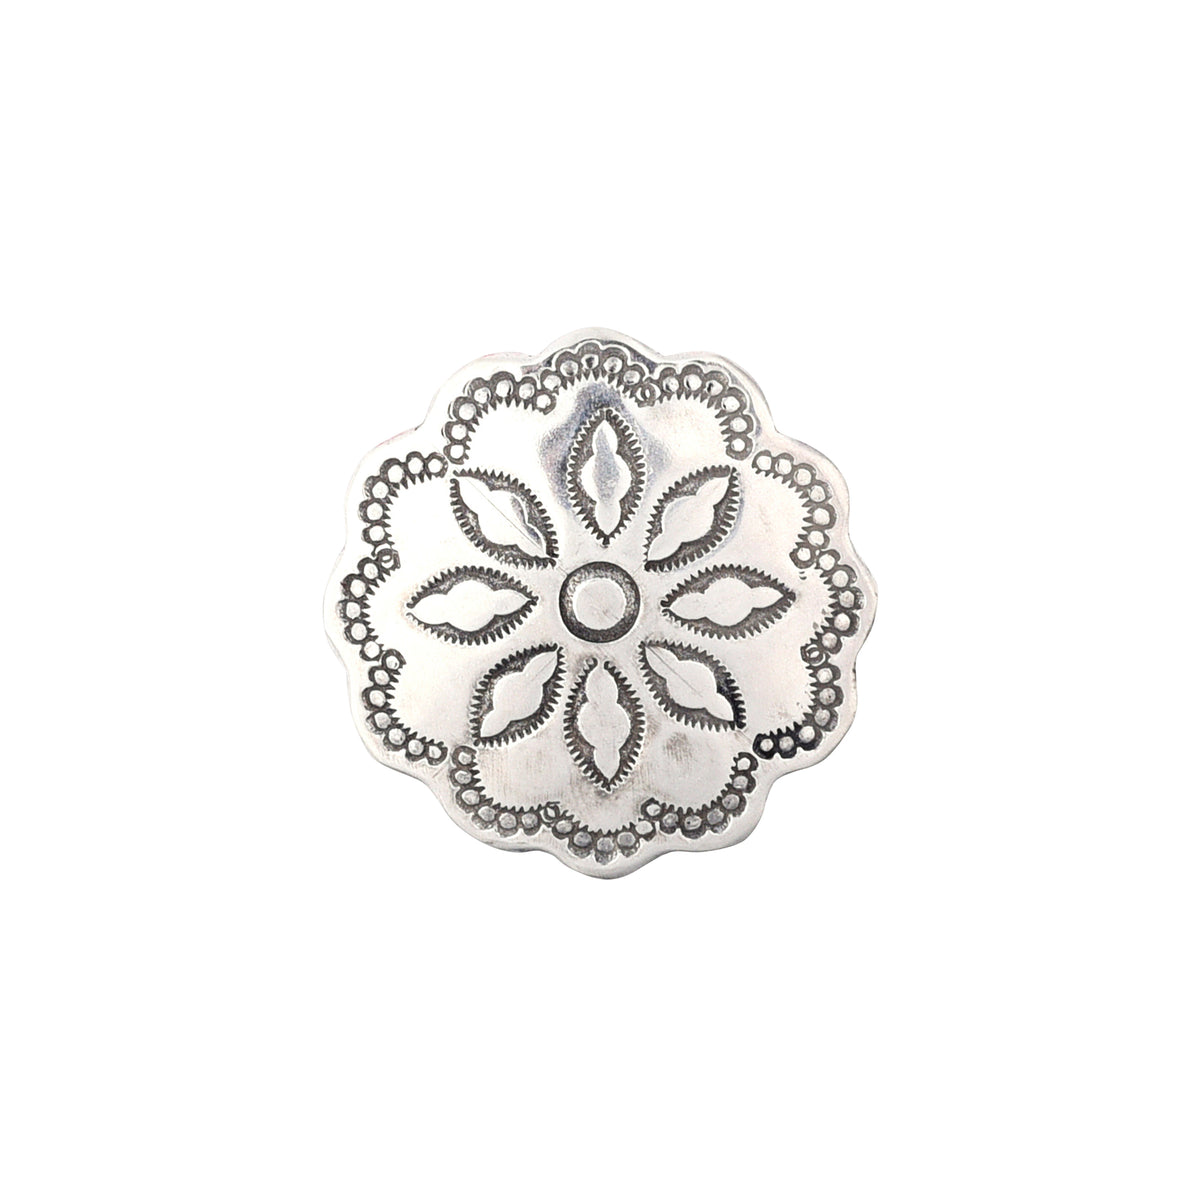 Concha Sterling Silver Pin | COWGIRL Heirloom by Peyote Bird